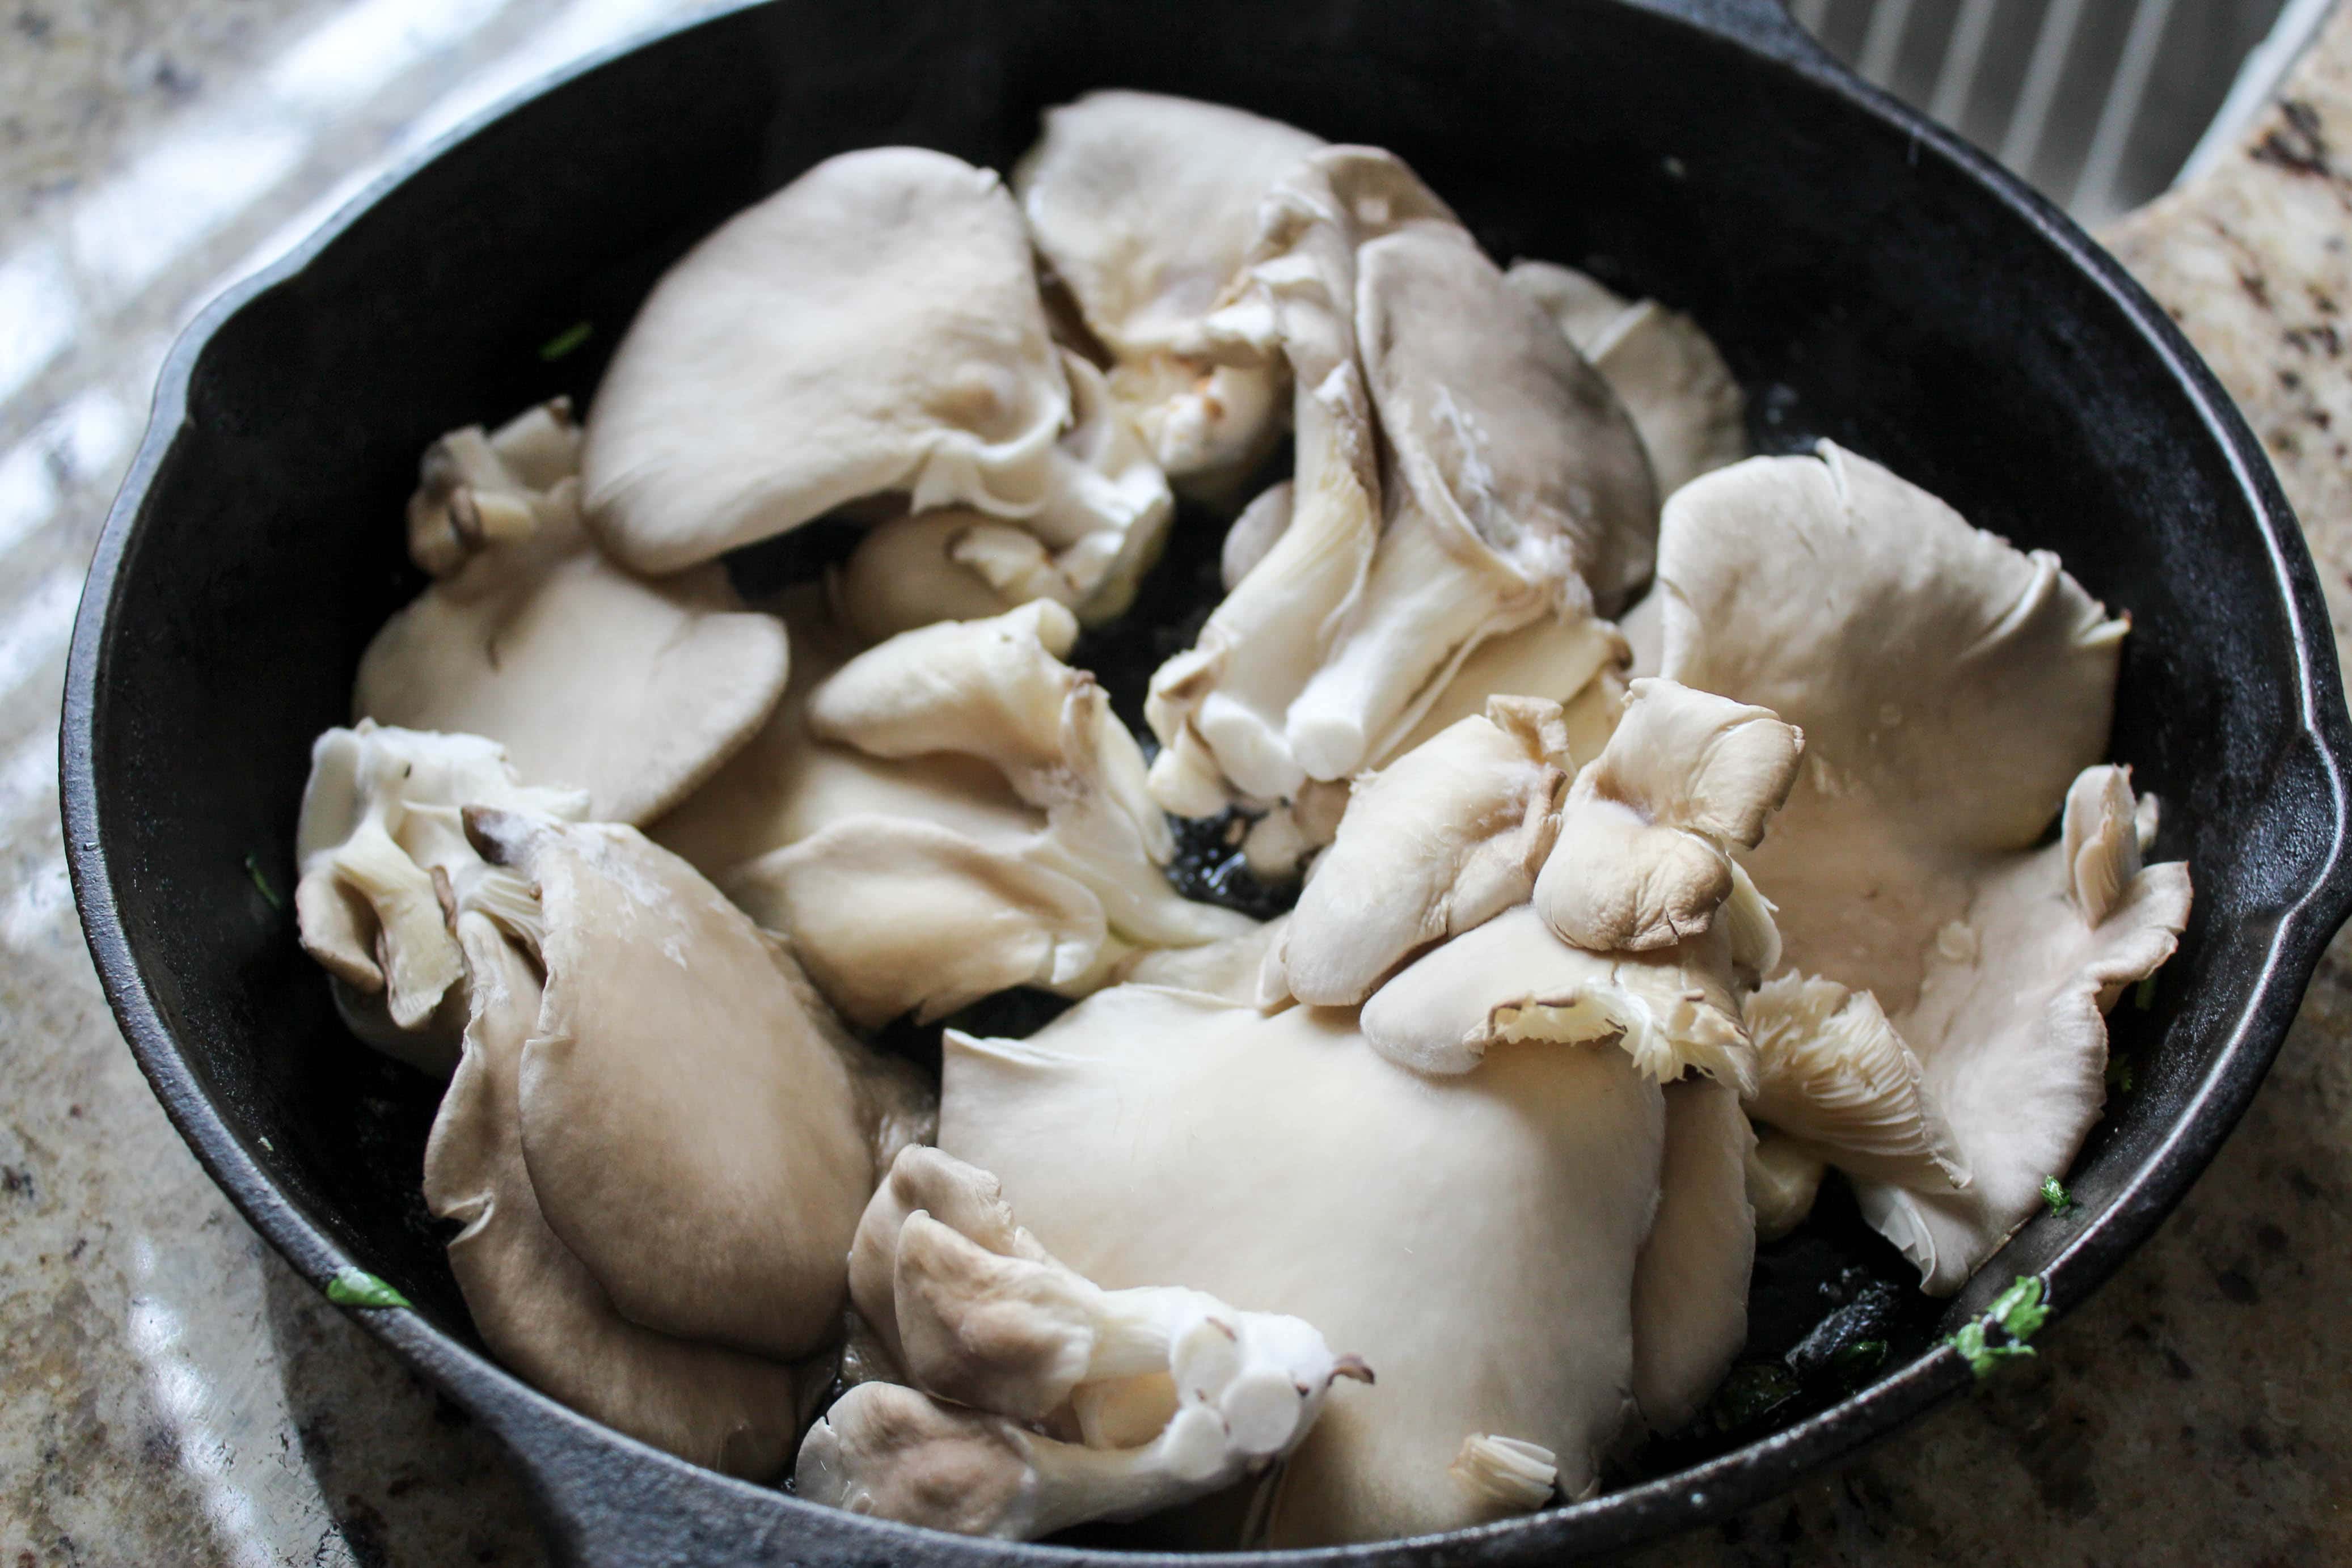 Oyster mushrooms in a cast iron skillet before being cooked.